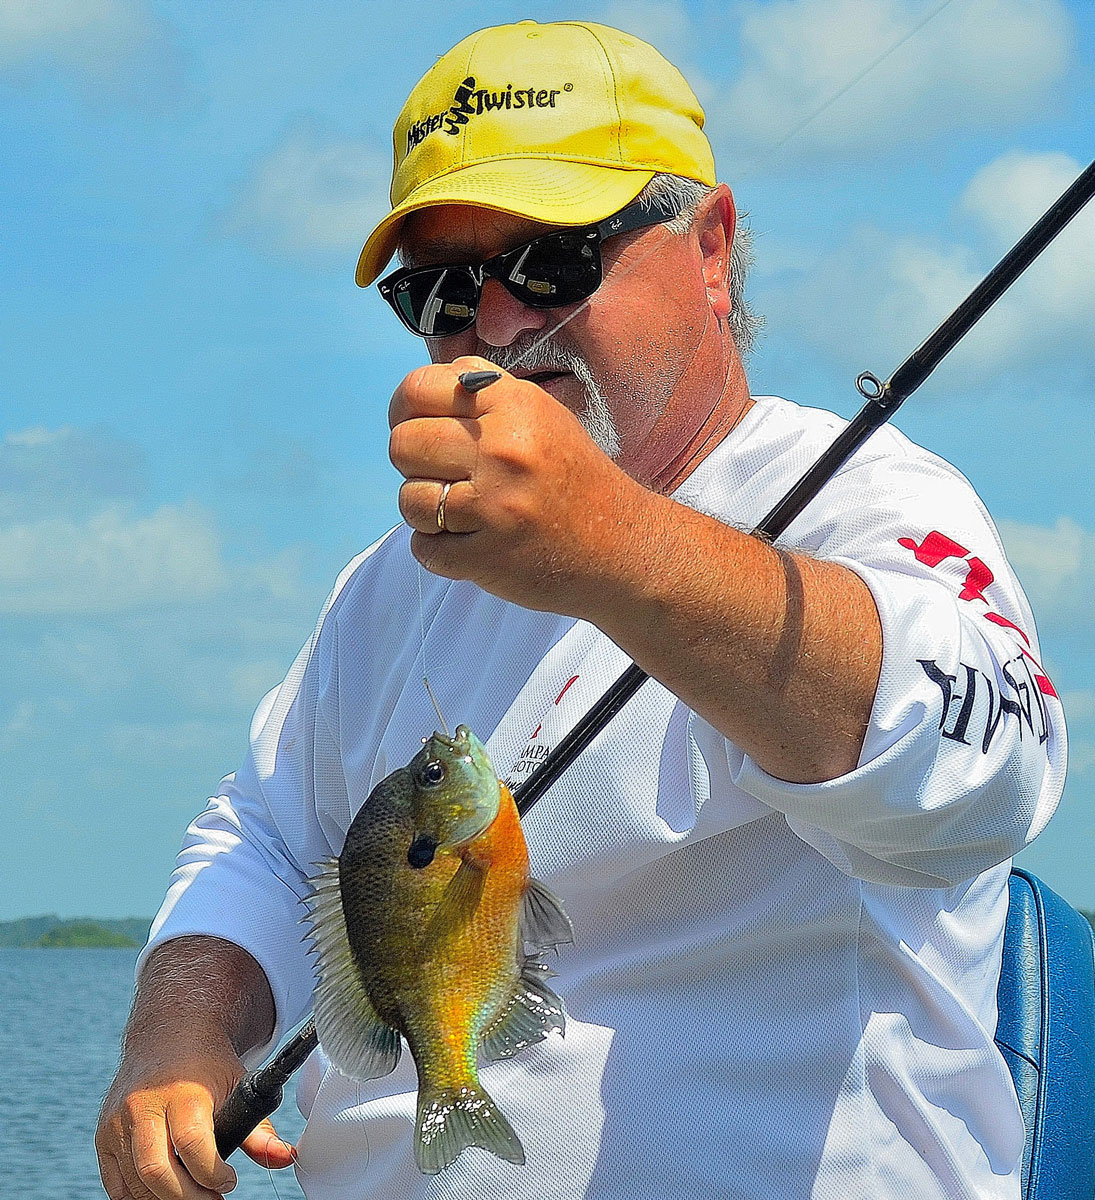 In July, bream begin suspending in schools above the crappie on brushpiles and other natural structure located along the main channel. These can be taken in good numbers tightlining a weighted cricket to the depths.